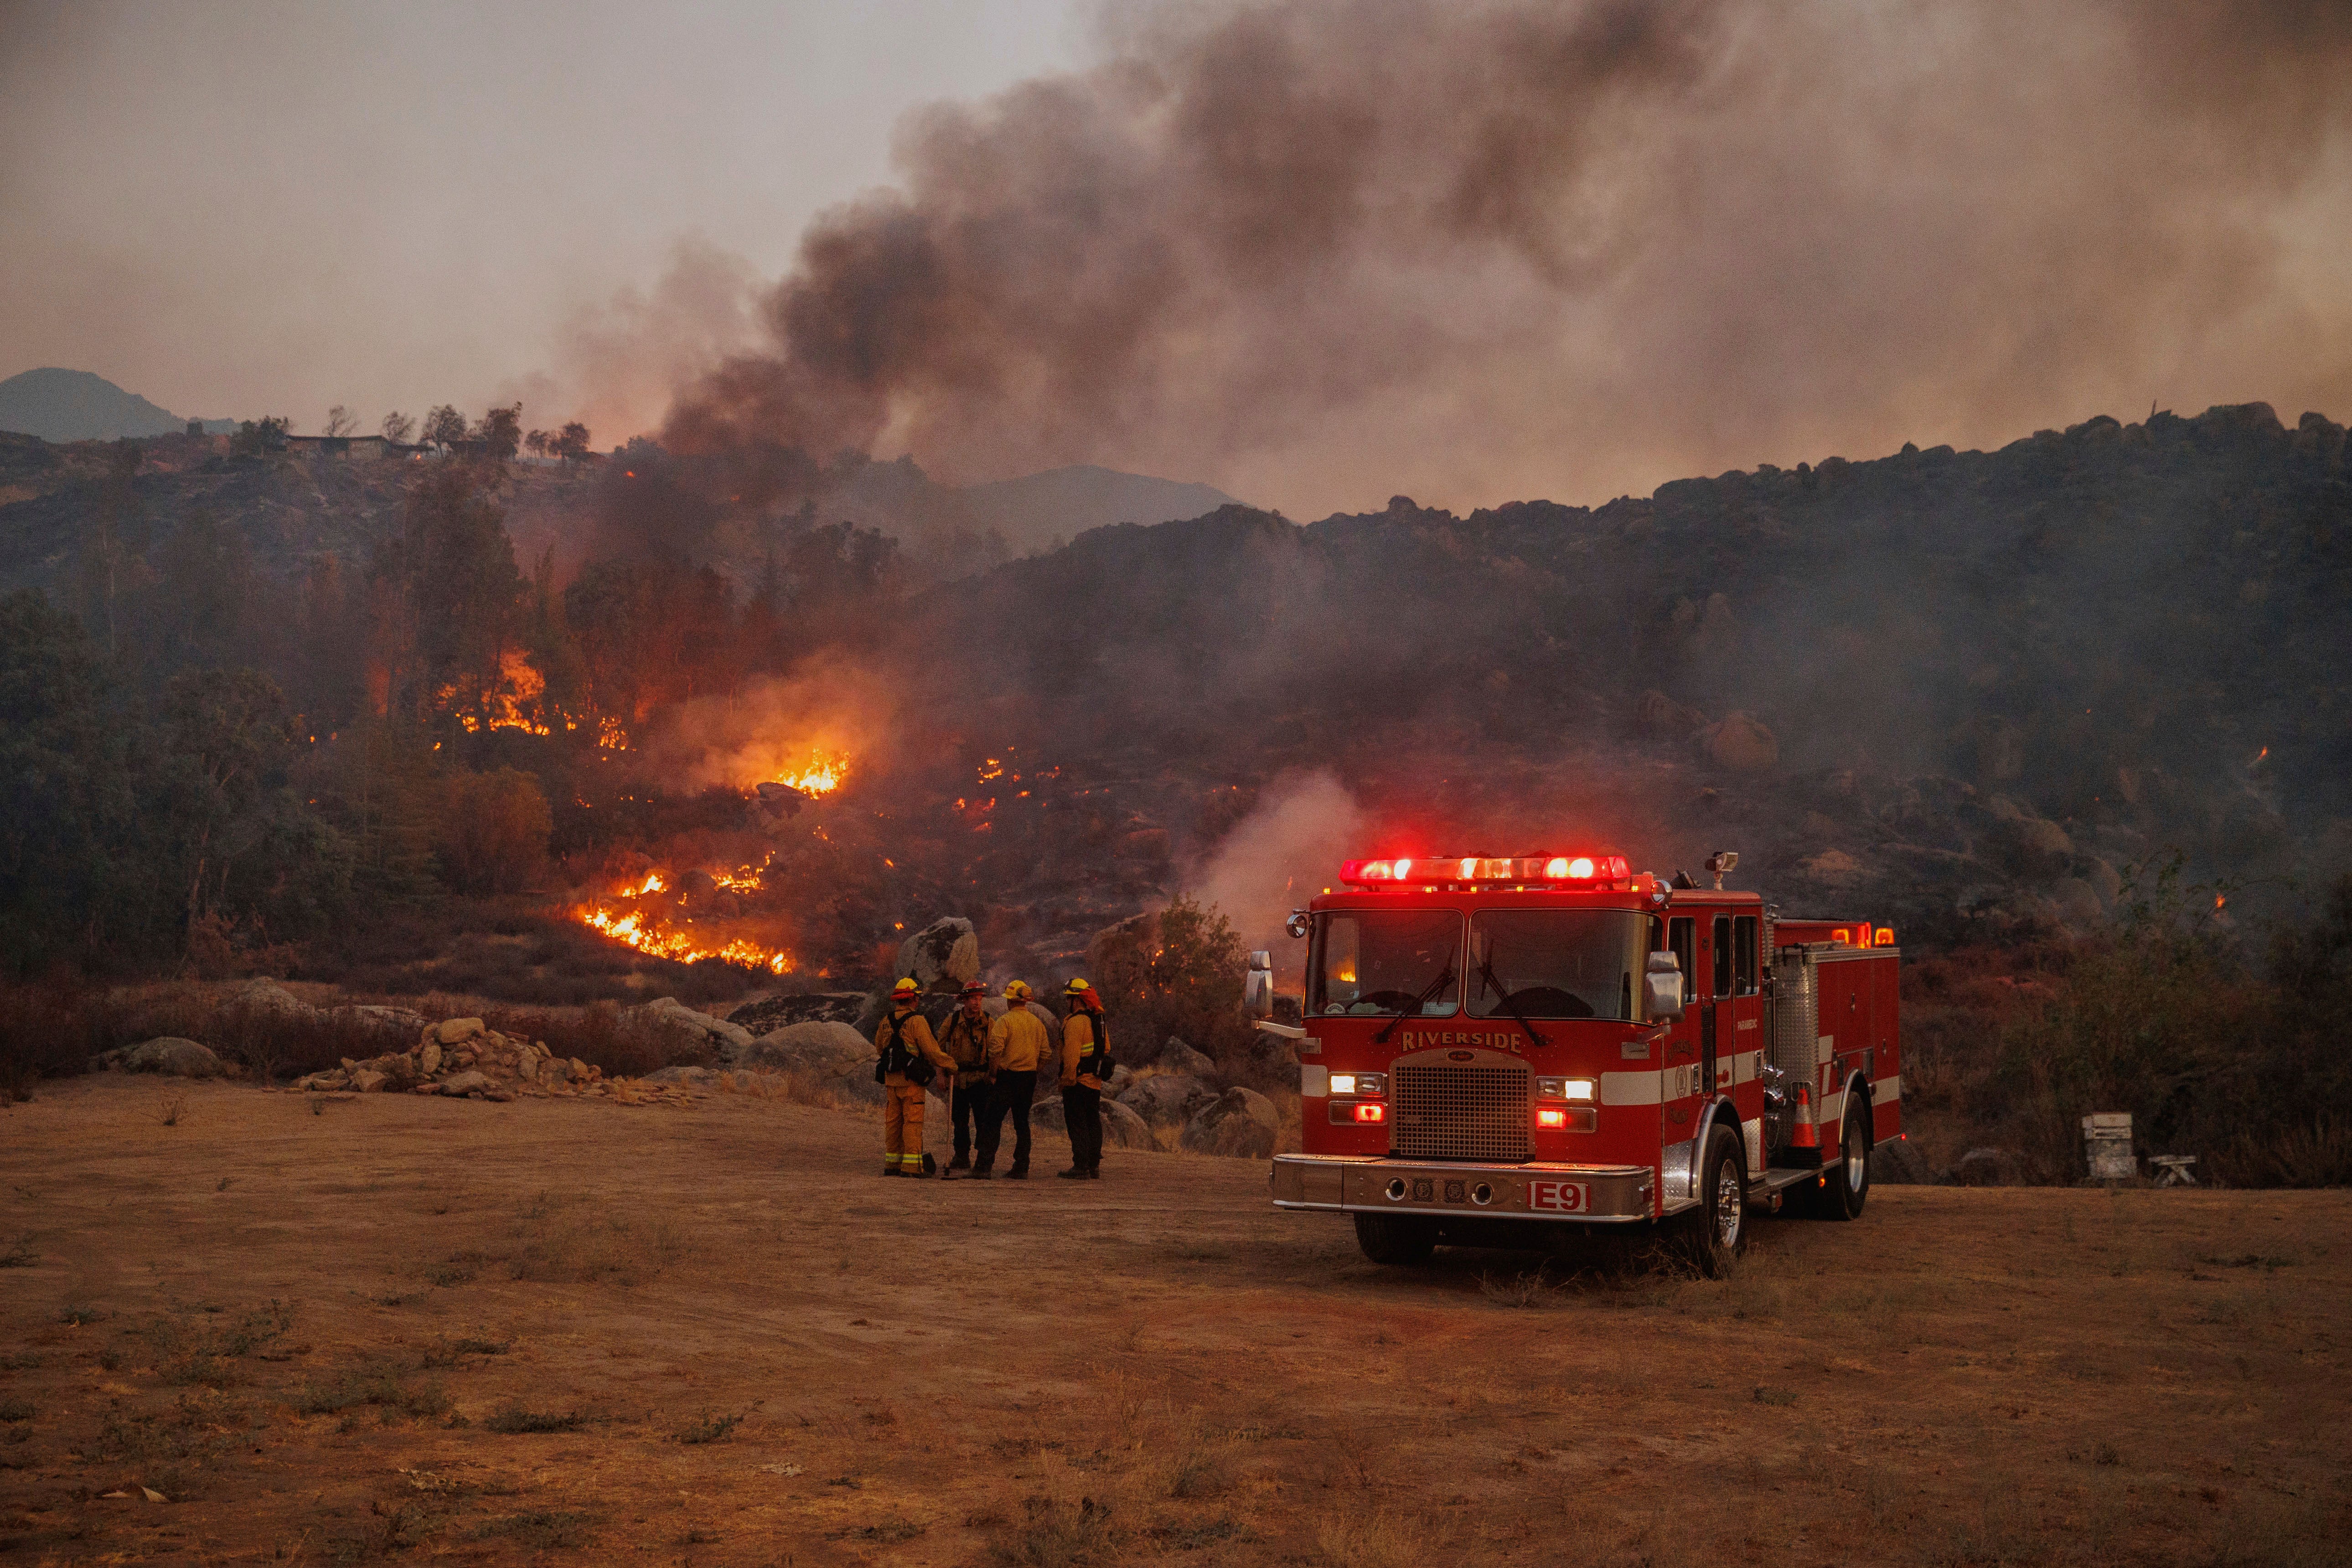 Firefighters stage in front of the Fairview Fire on Monday, Sept. 5, 2022, near Hemet, California.  (Photo: Ethan Swope, AP)